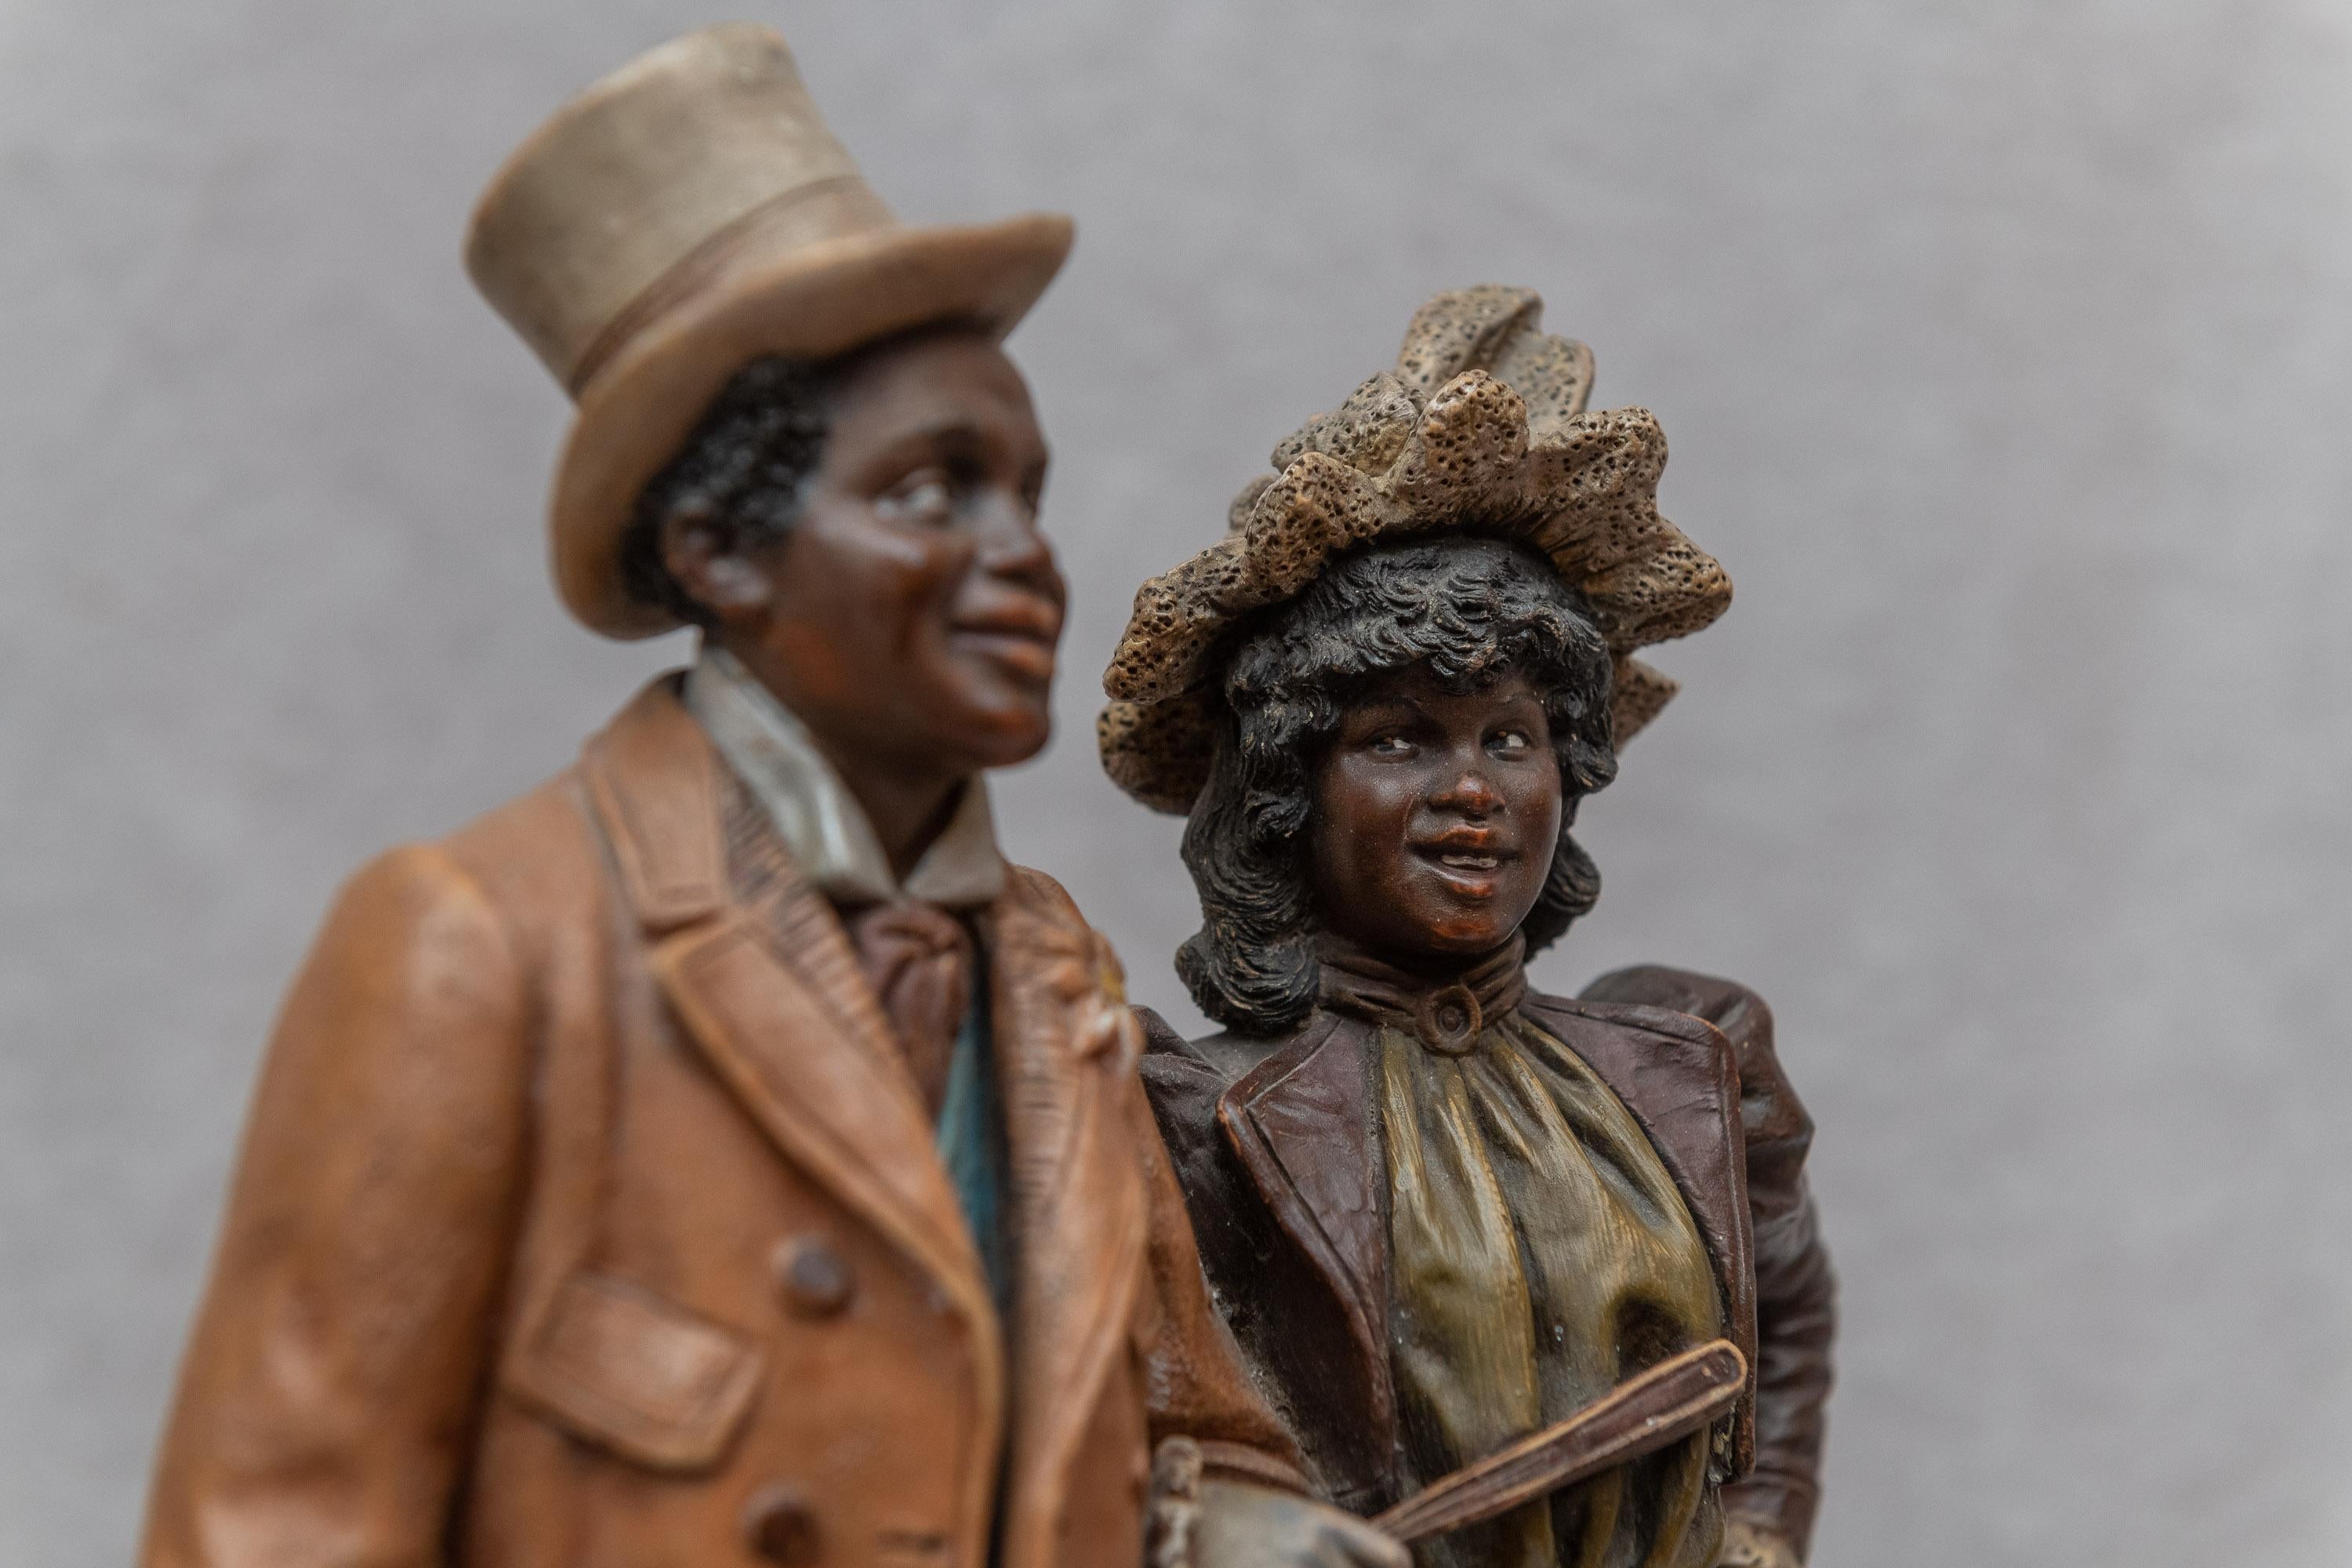 Cold-Painted Austrian Terra Cotta Cigar Holder with Collectible Black Figures, ca. 1900